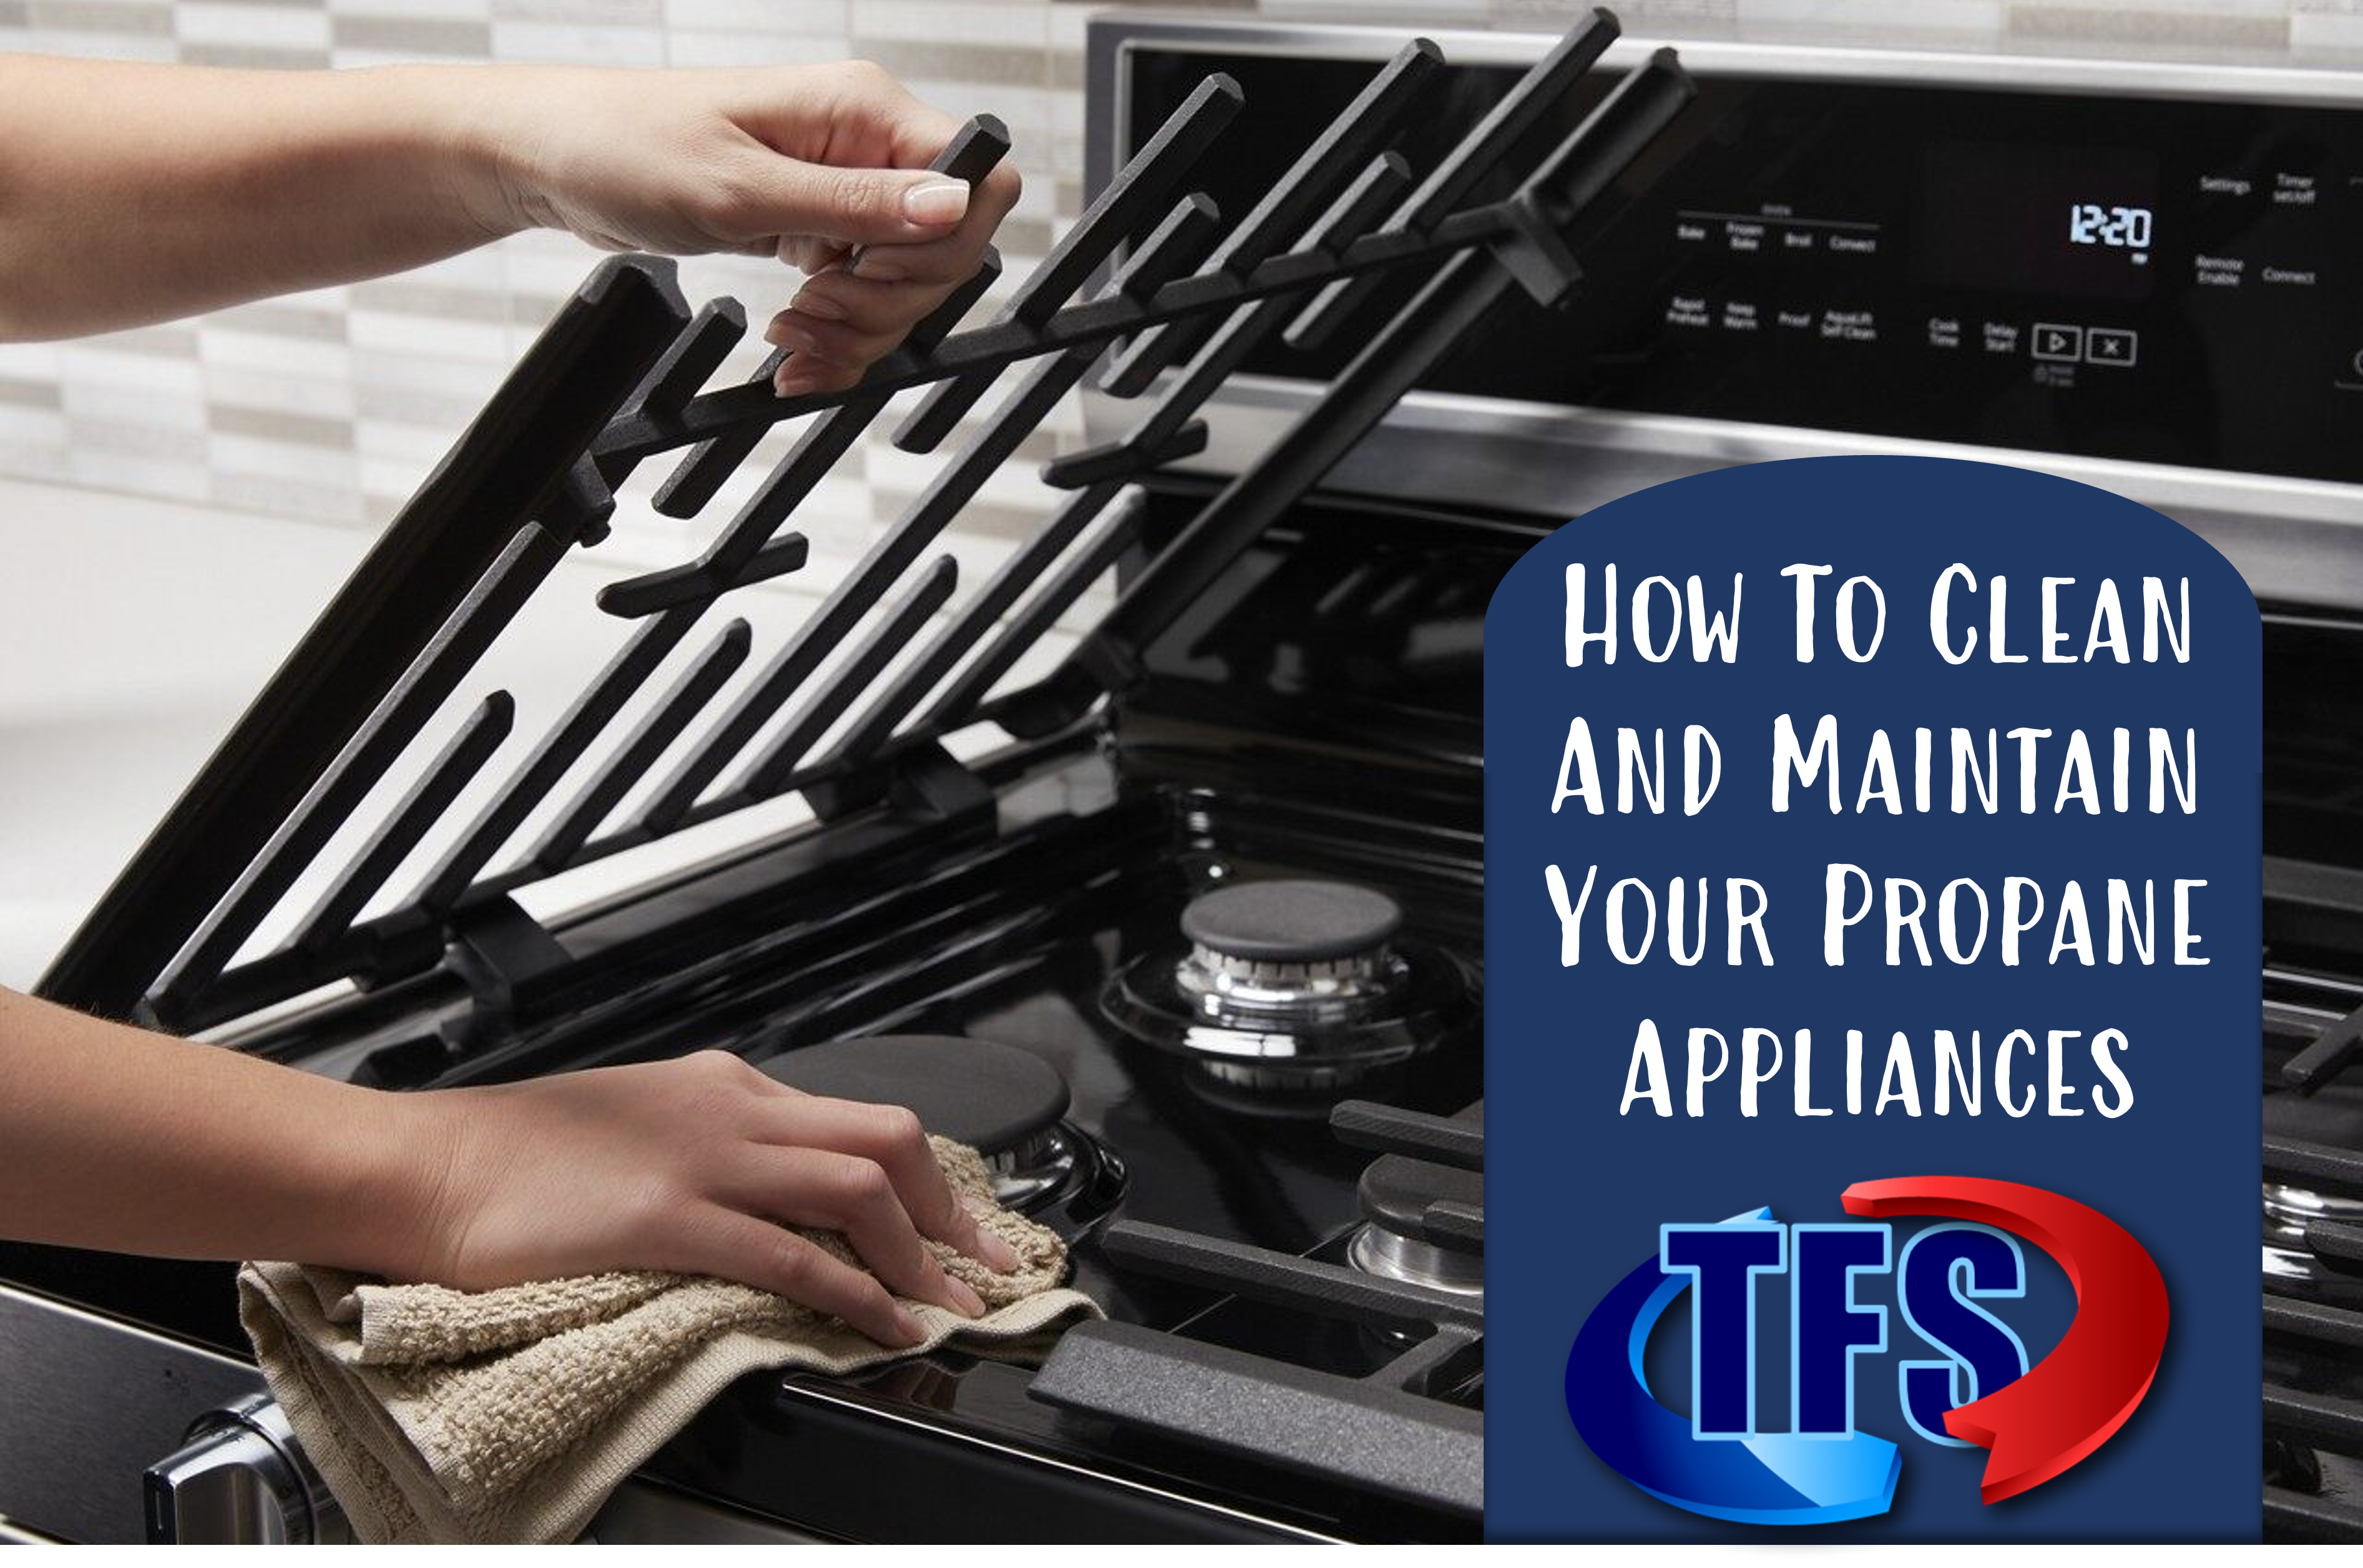 How To Clean and Maintain Your Propane Appliances